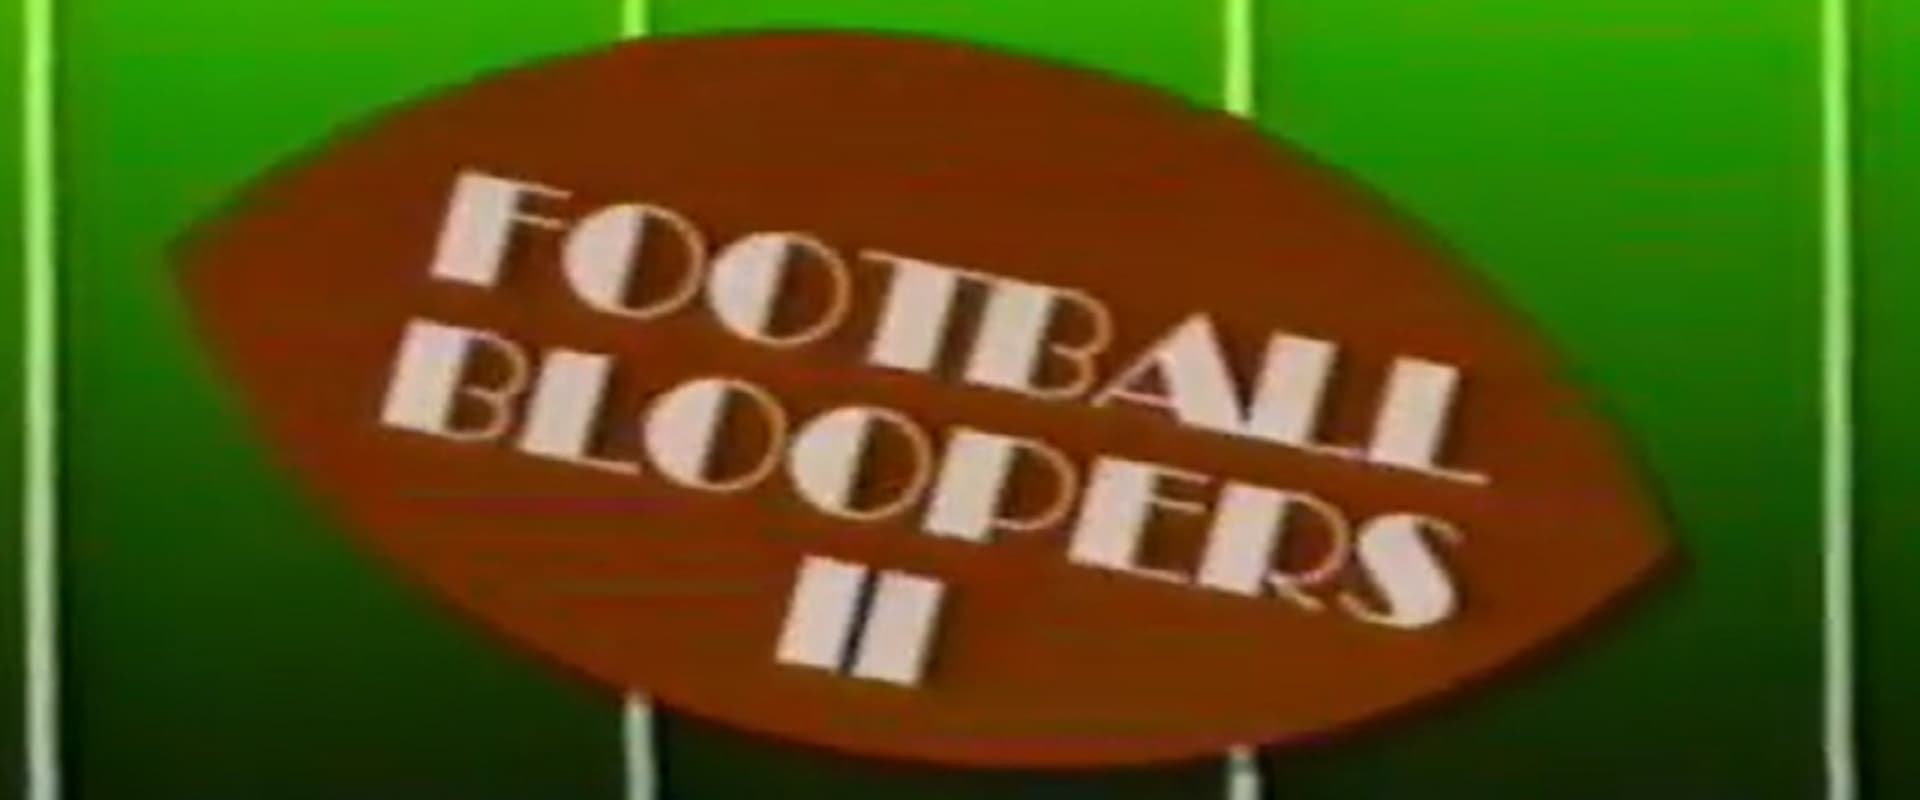 The Best of Football Bloopers Vol. 2